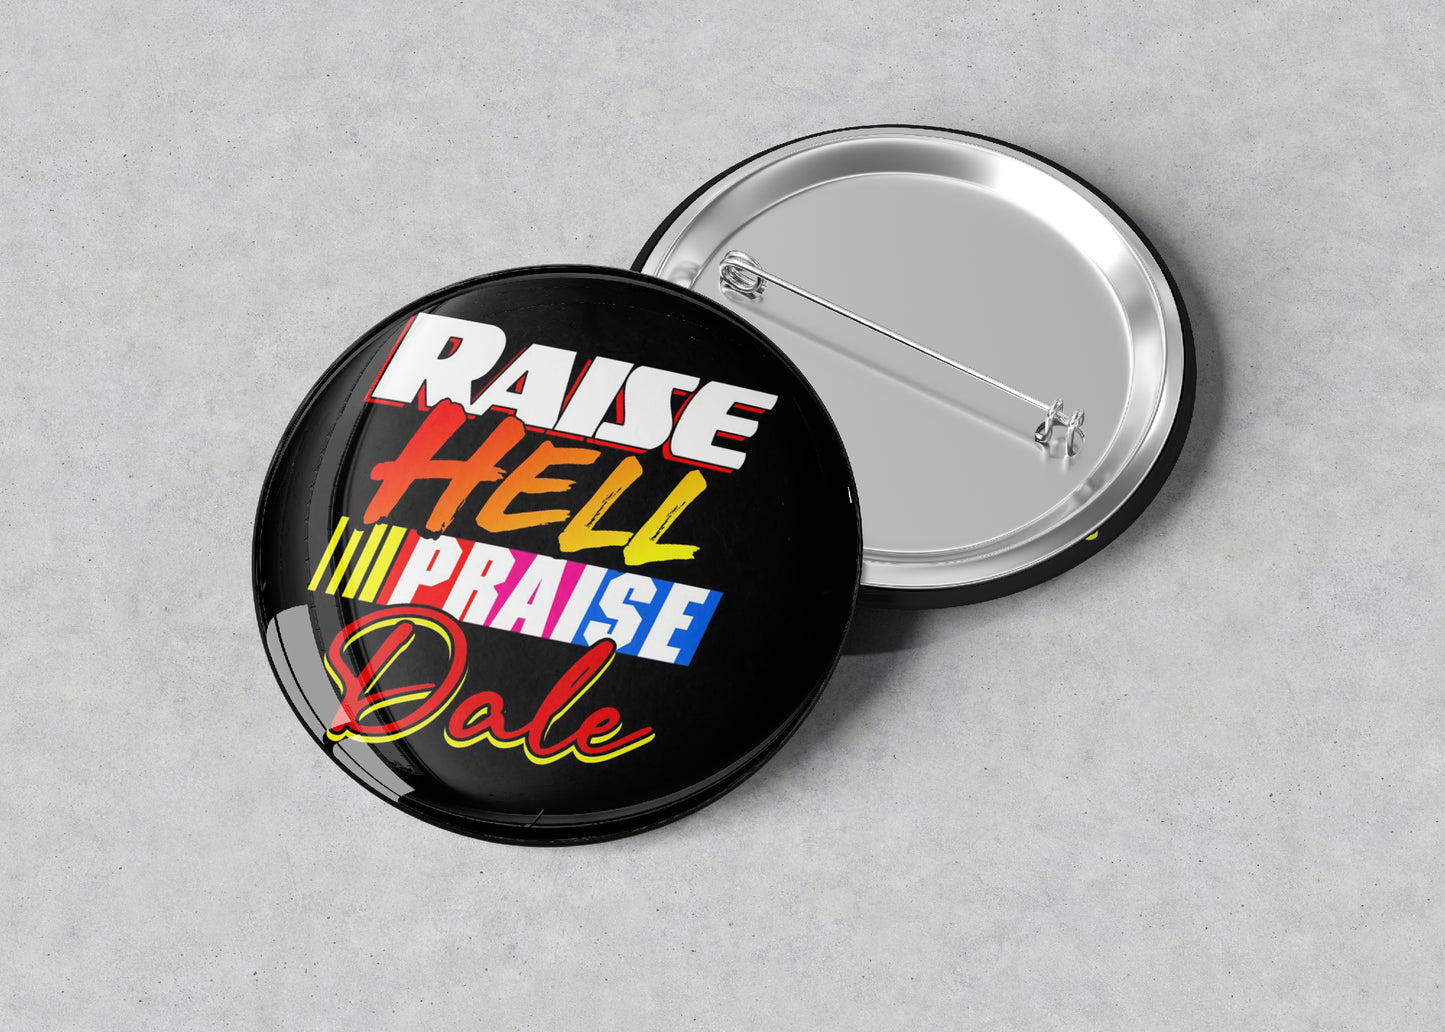 Raise Hell Praise Dale and Drive Fast Eat Ass Pin/Buttons